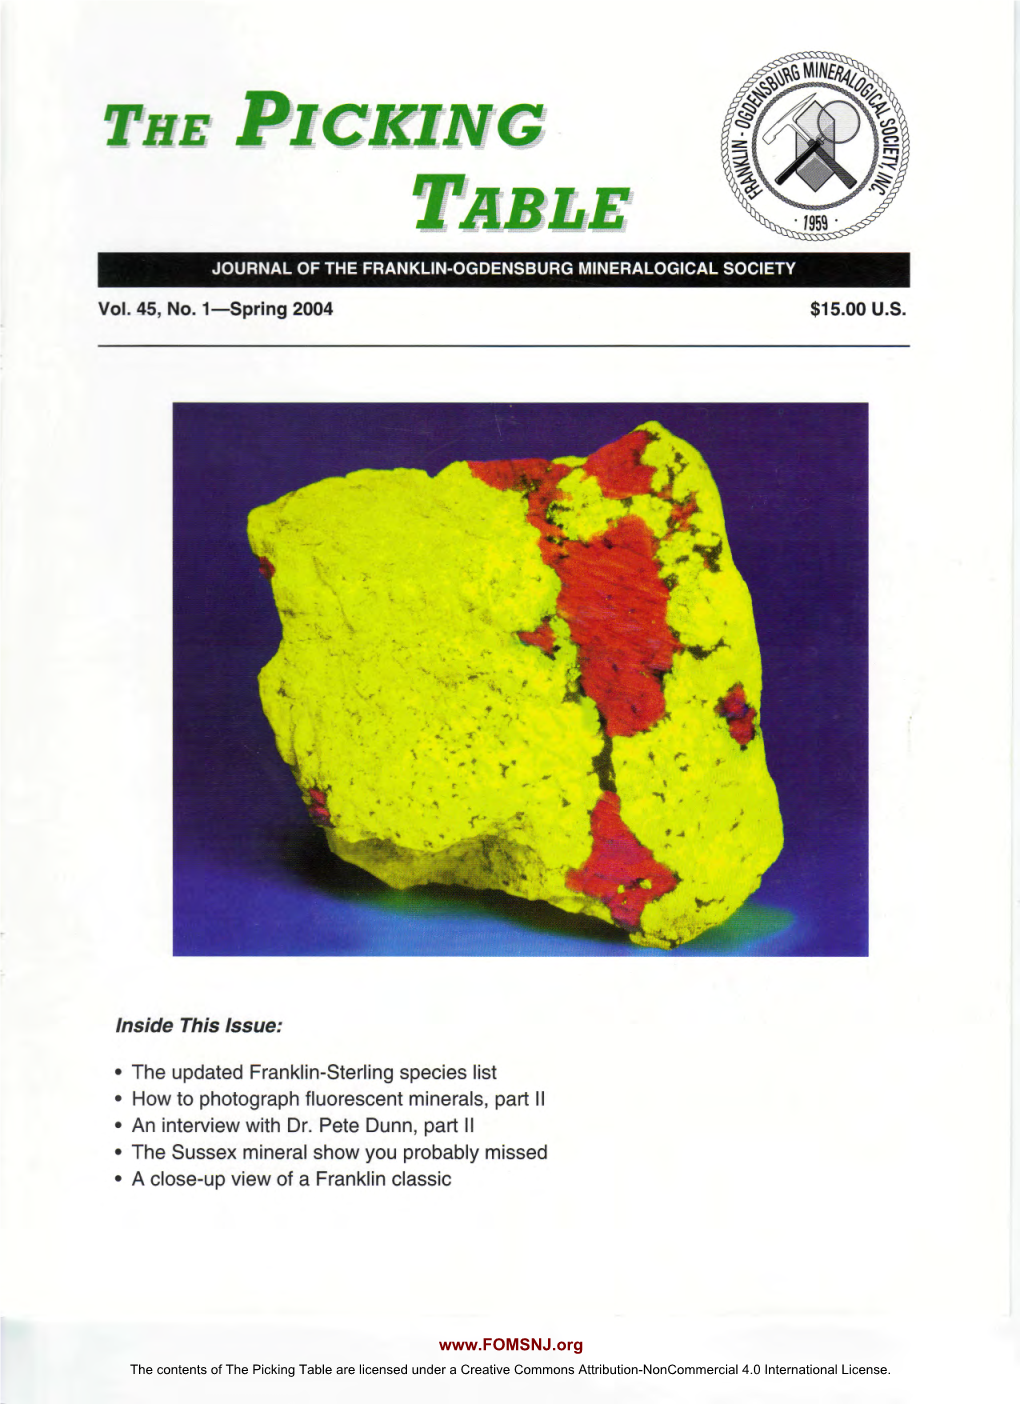 The Picking Table Volume 45, No. 1 – Spring 2004